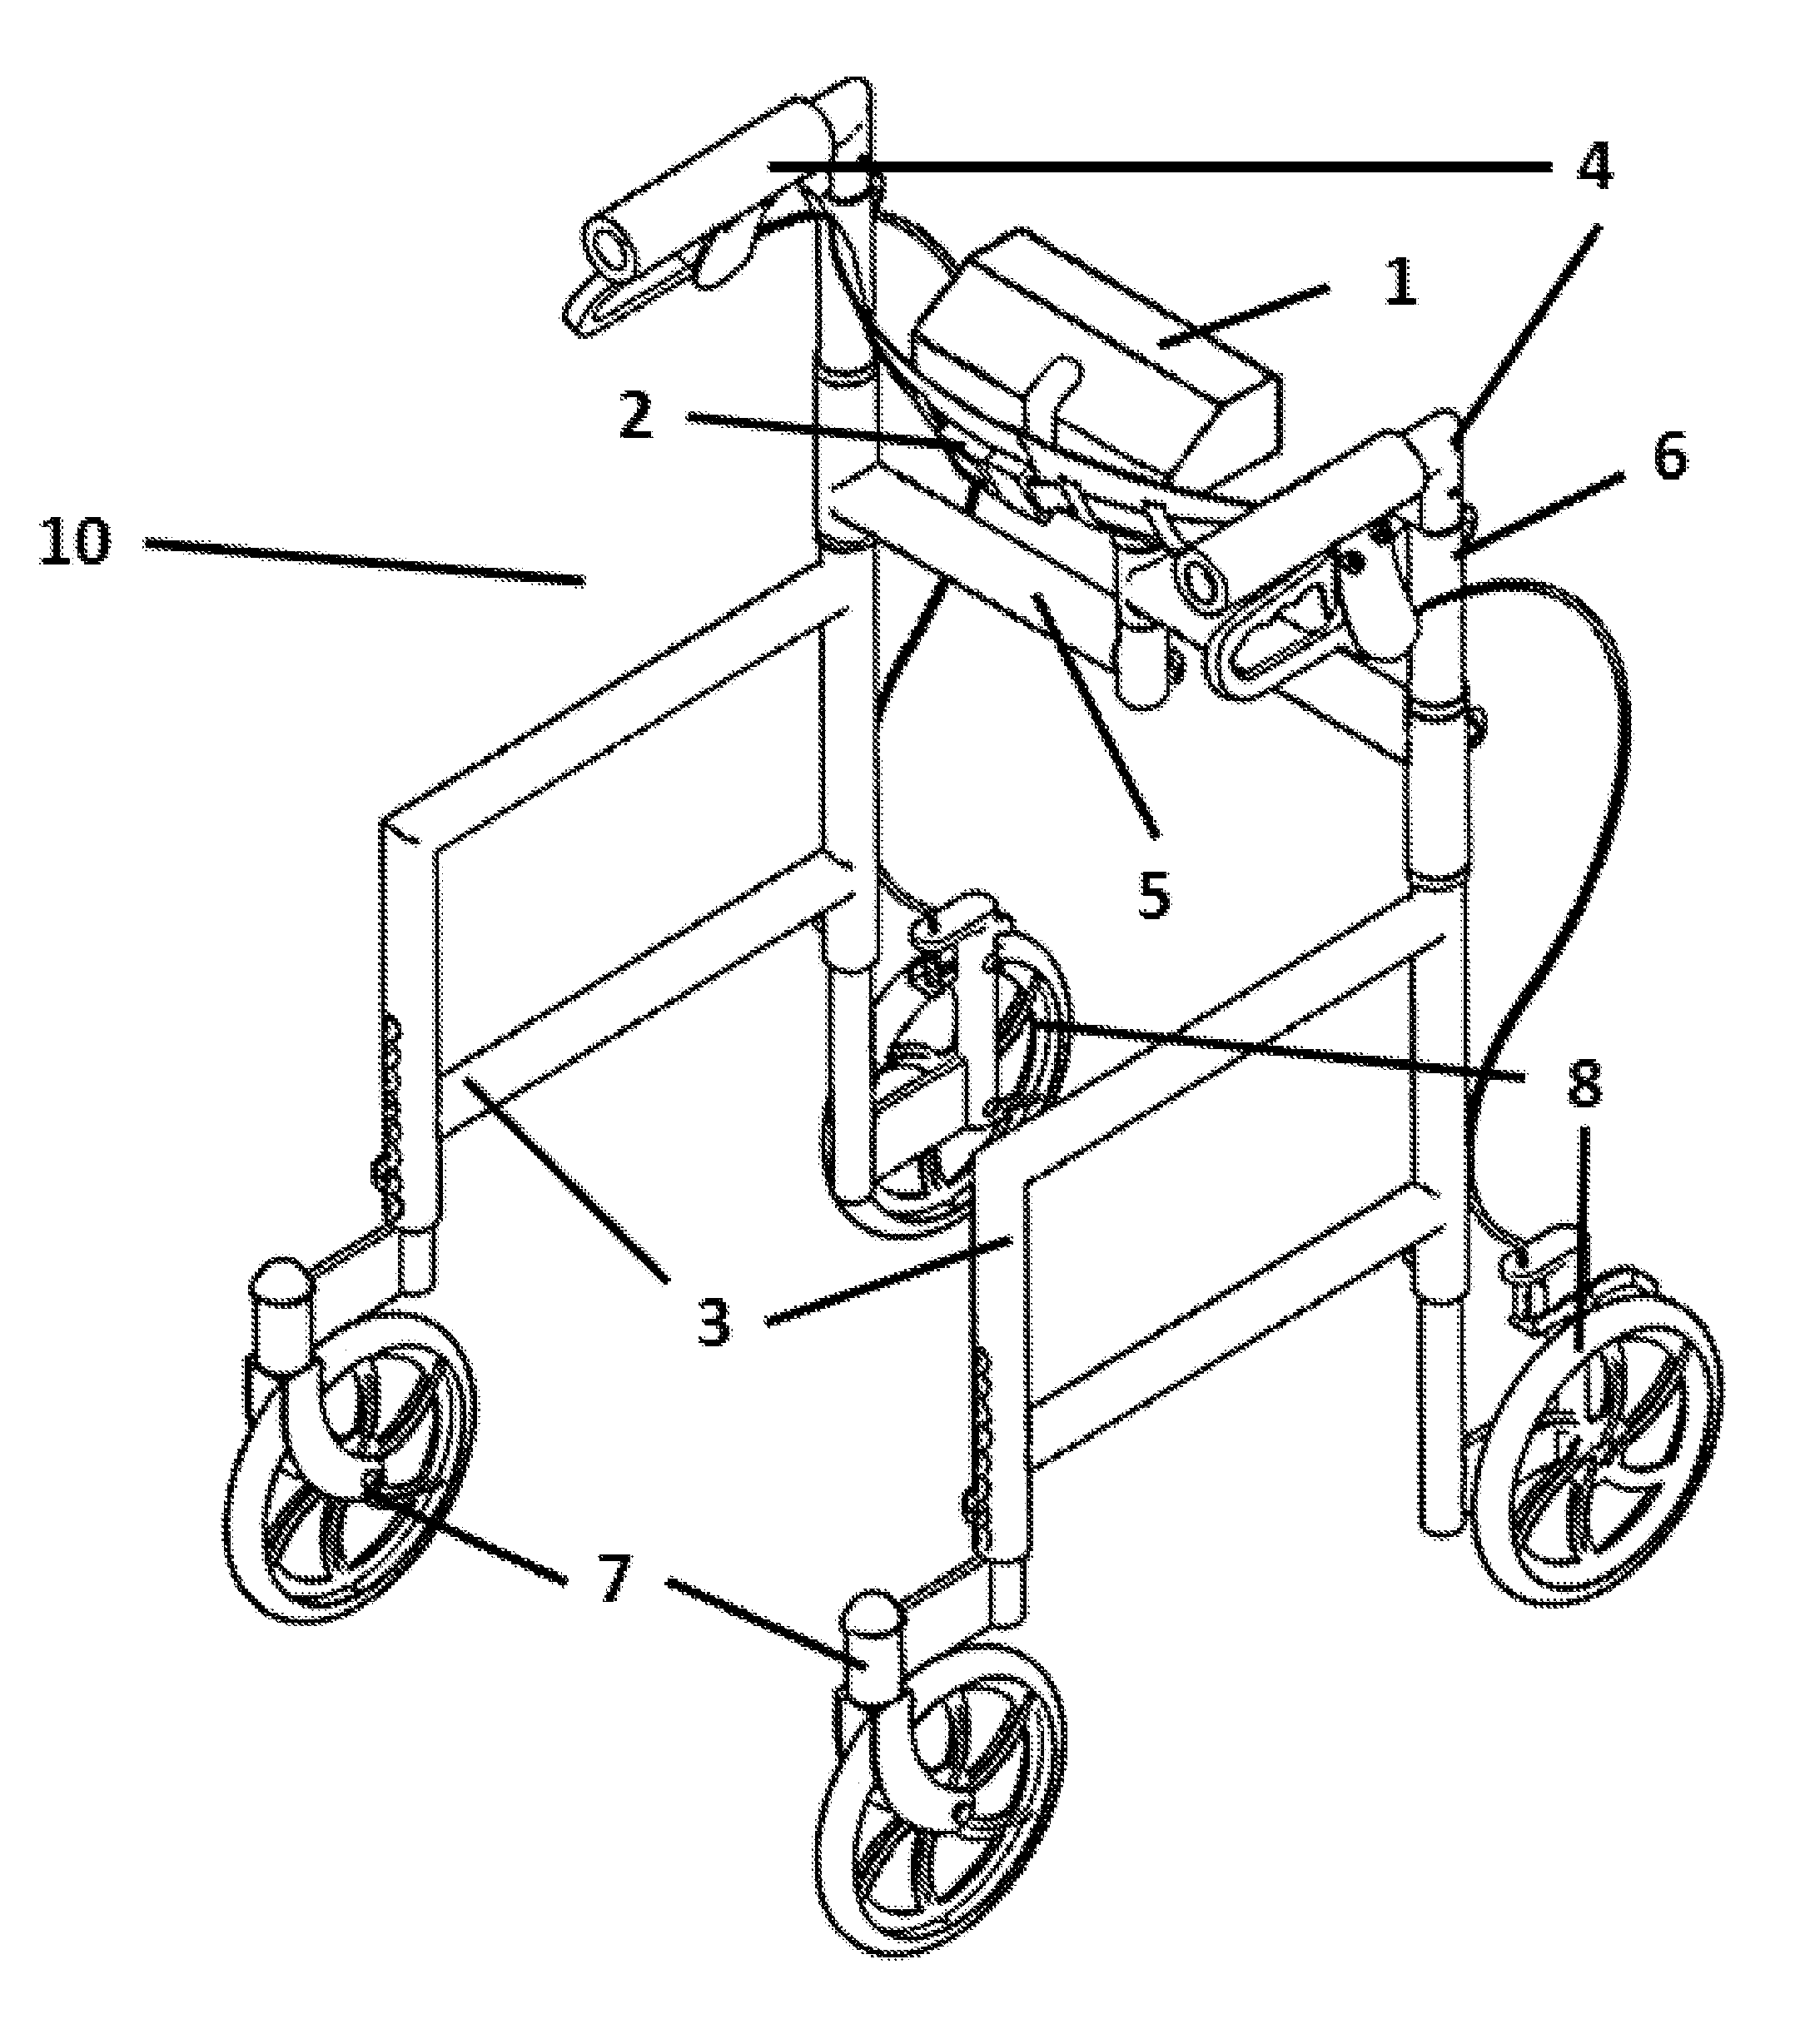 Mobility Assistance Device